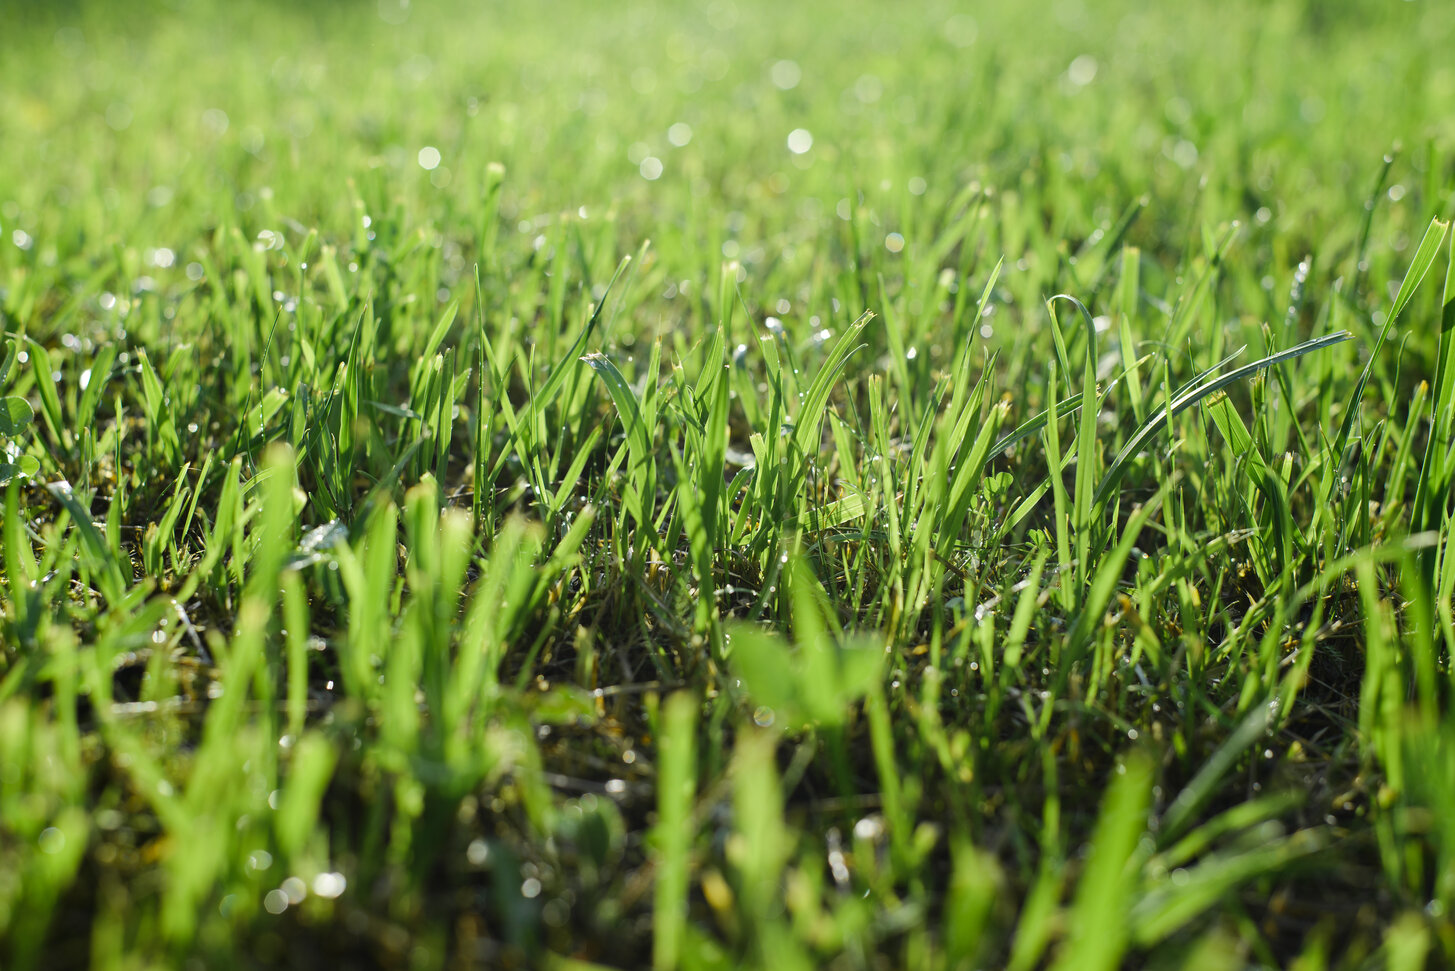 What happens if you apply fertilizer to wet grass?